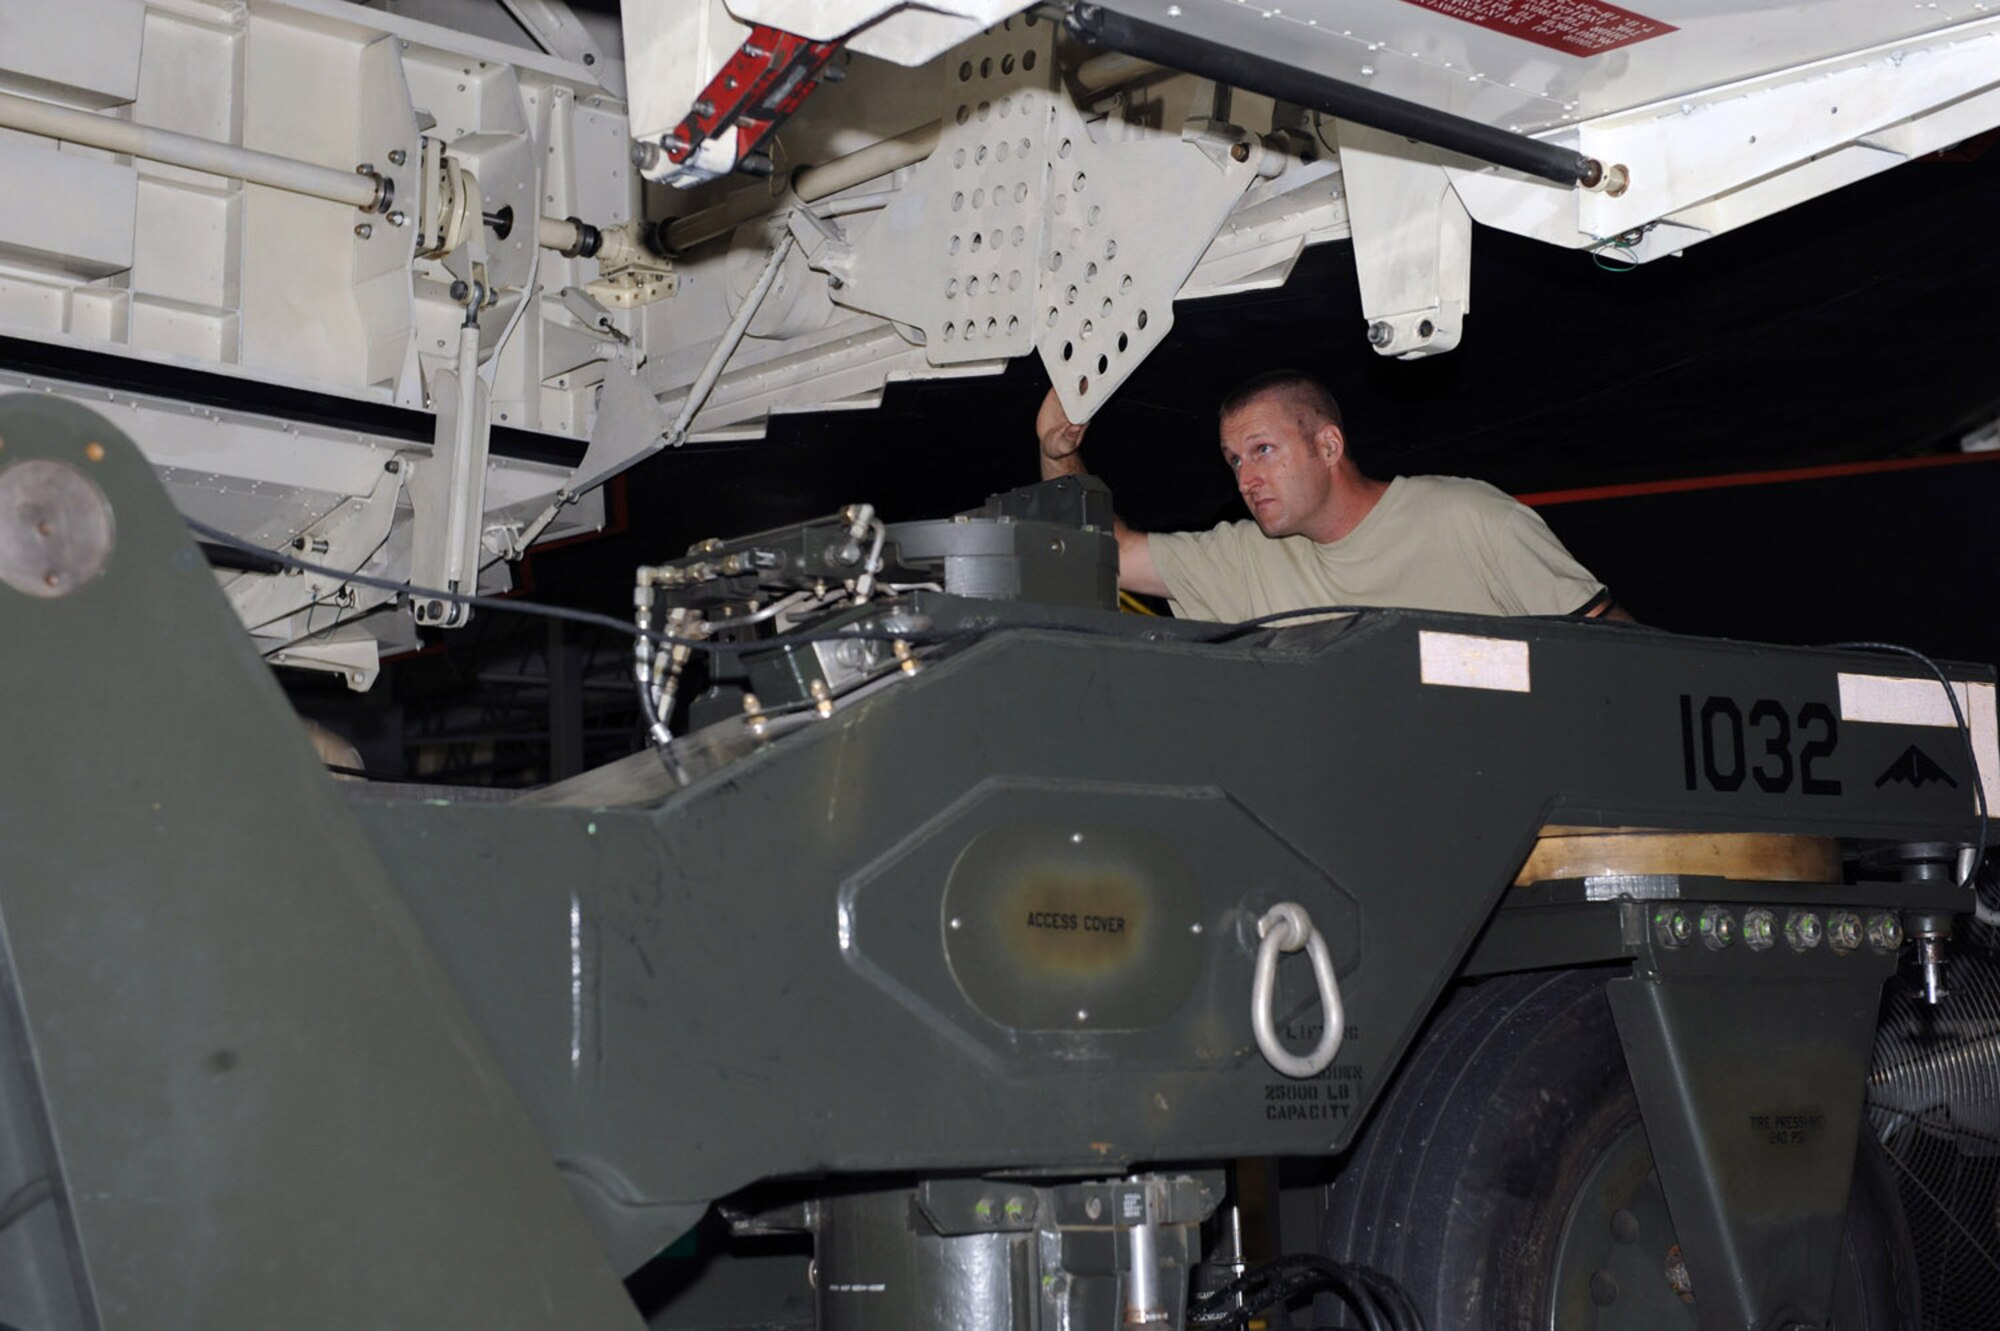 WHITEMAN AIR FORCE BASE, Mo. – Tech. Sgt. Ryan Graney, Loading Standardization Crew member, assists in guiding a weapons trailer under the Weapons Load Trainer Aug. 14. Loading and unloading the WLT, as well as an actual B-2, requires a four-man team of certified weapons system loaders. (U.S. Air Force photo/Senior Airman Jason Huddleston)